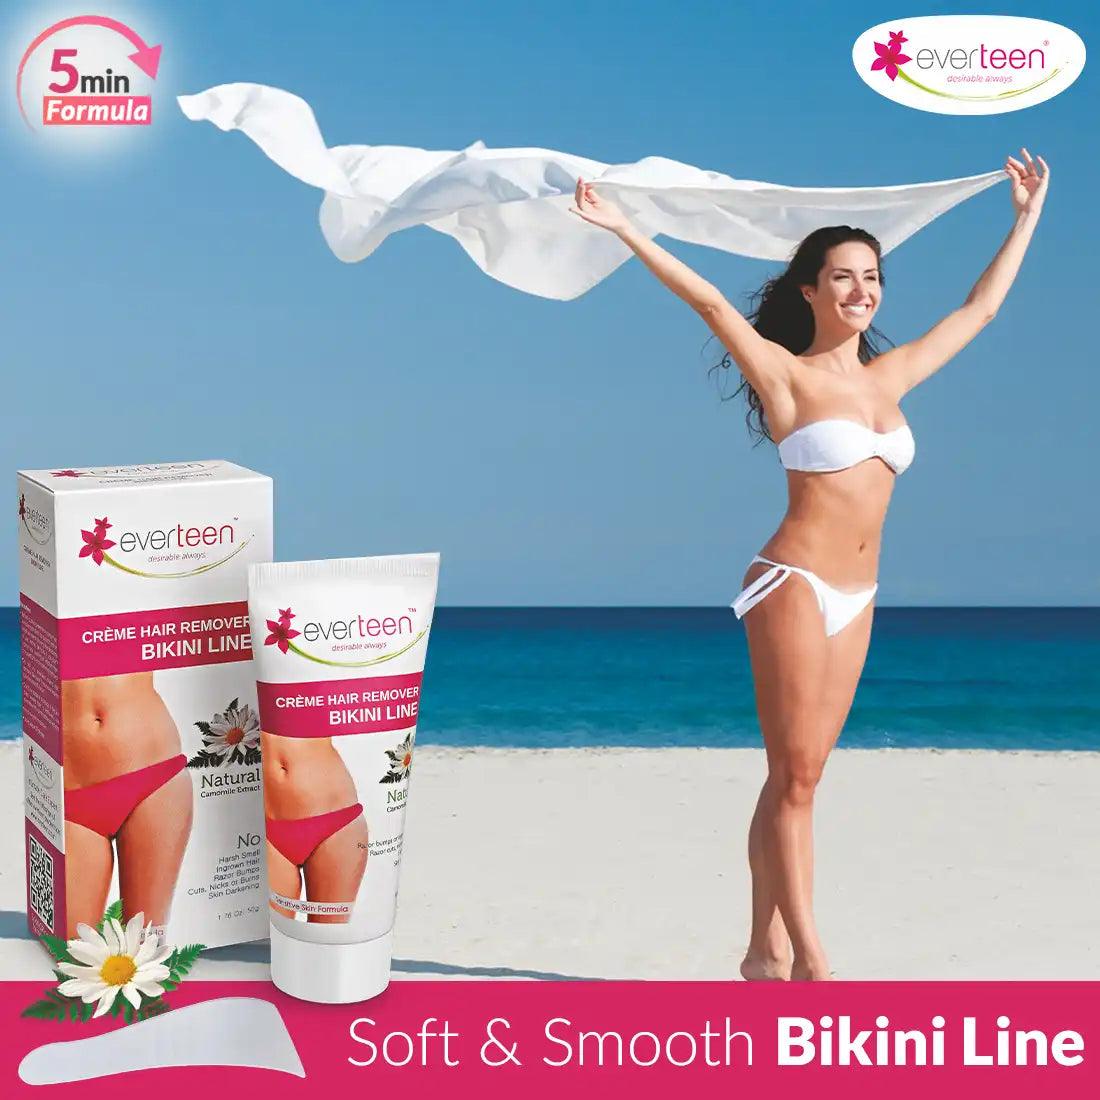 everteen Natural Hair Remover Creme Gives You Soft and Smooth Bikini Line in Just 5 Minutes - everteen-neud.com